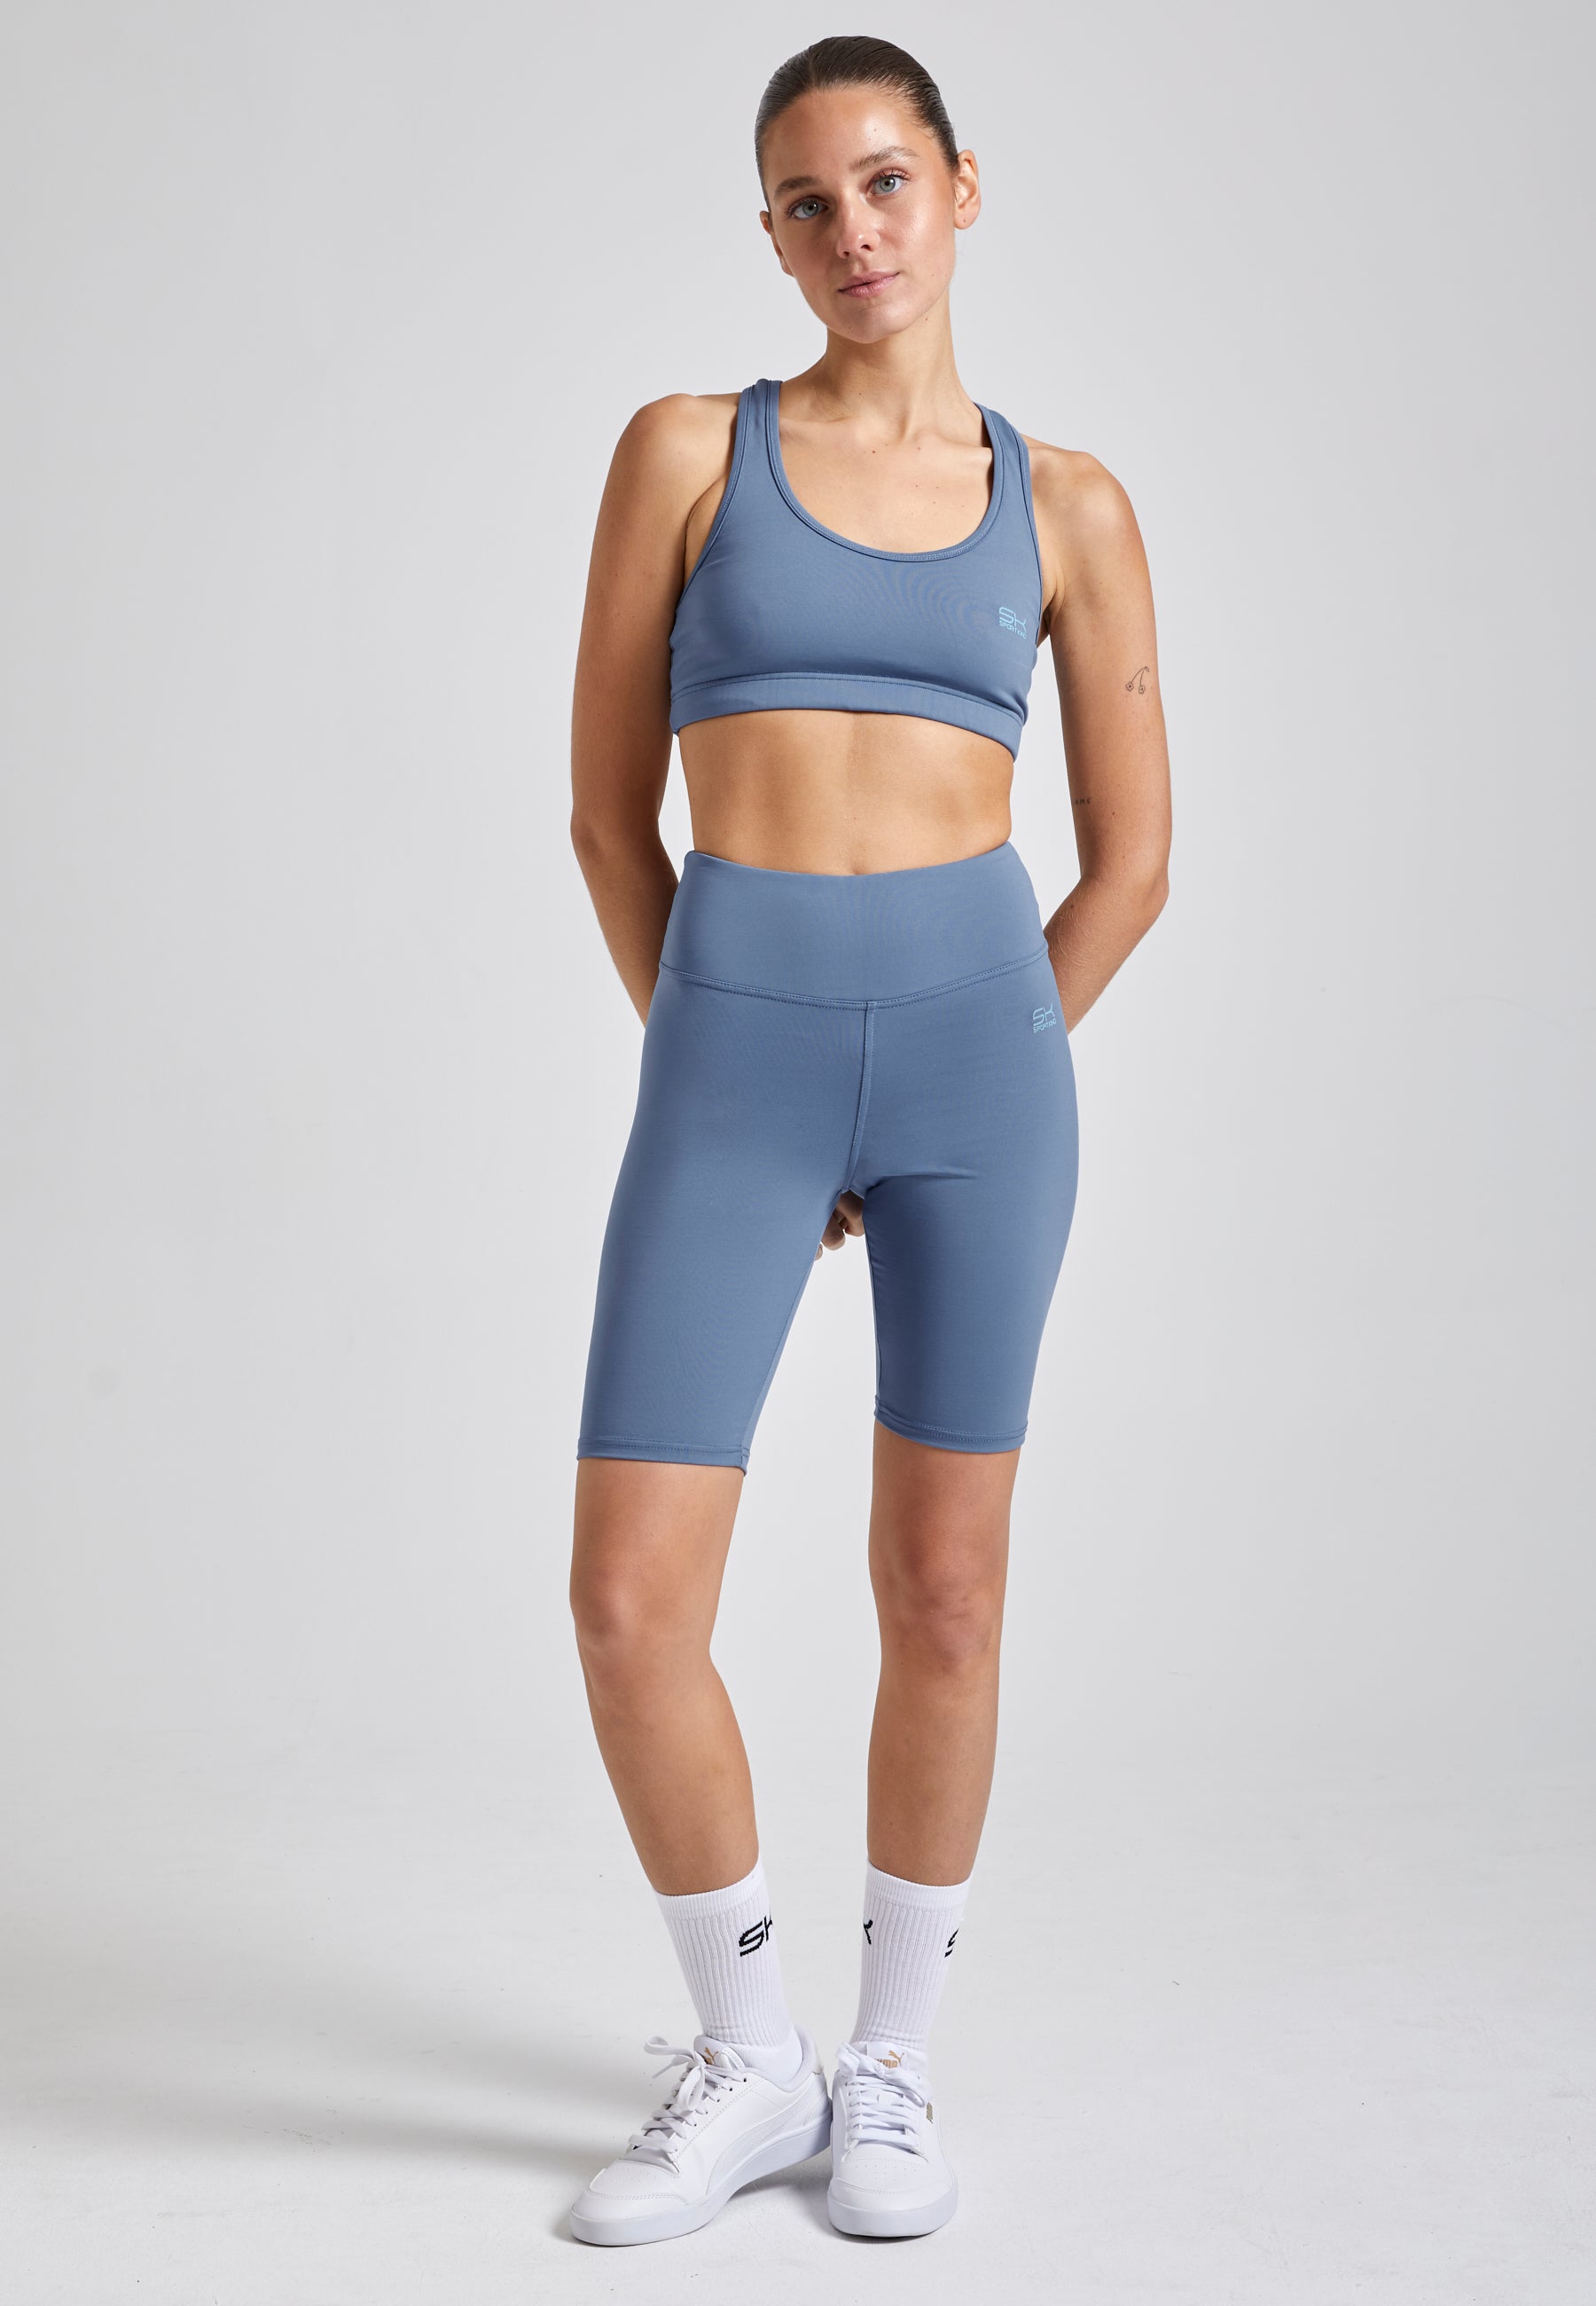 Tennis leggings with pockets long, gray blue – SK SPORTKIND